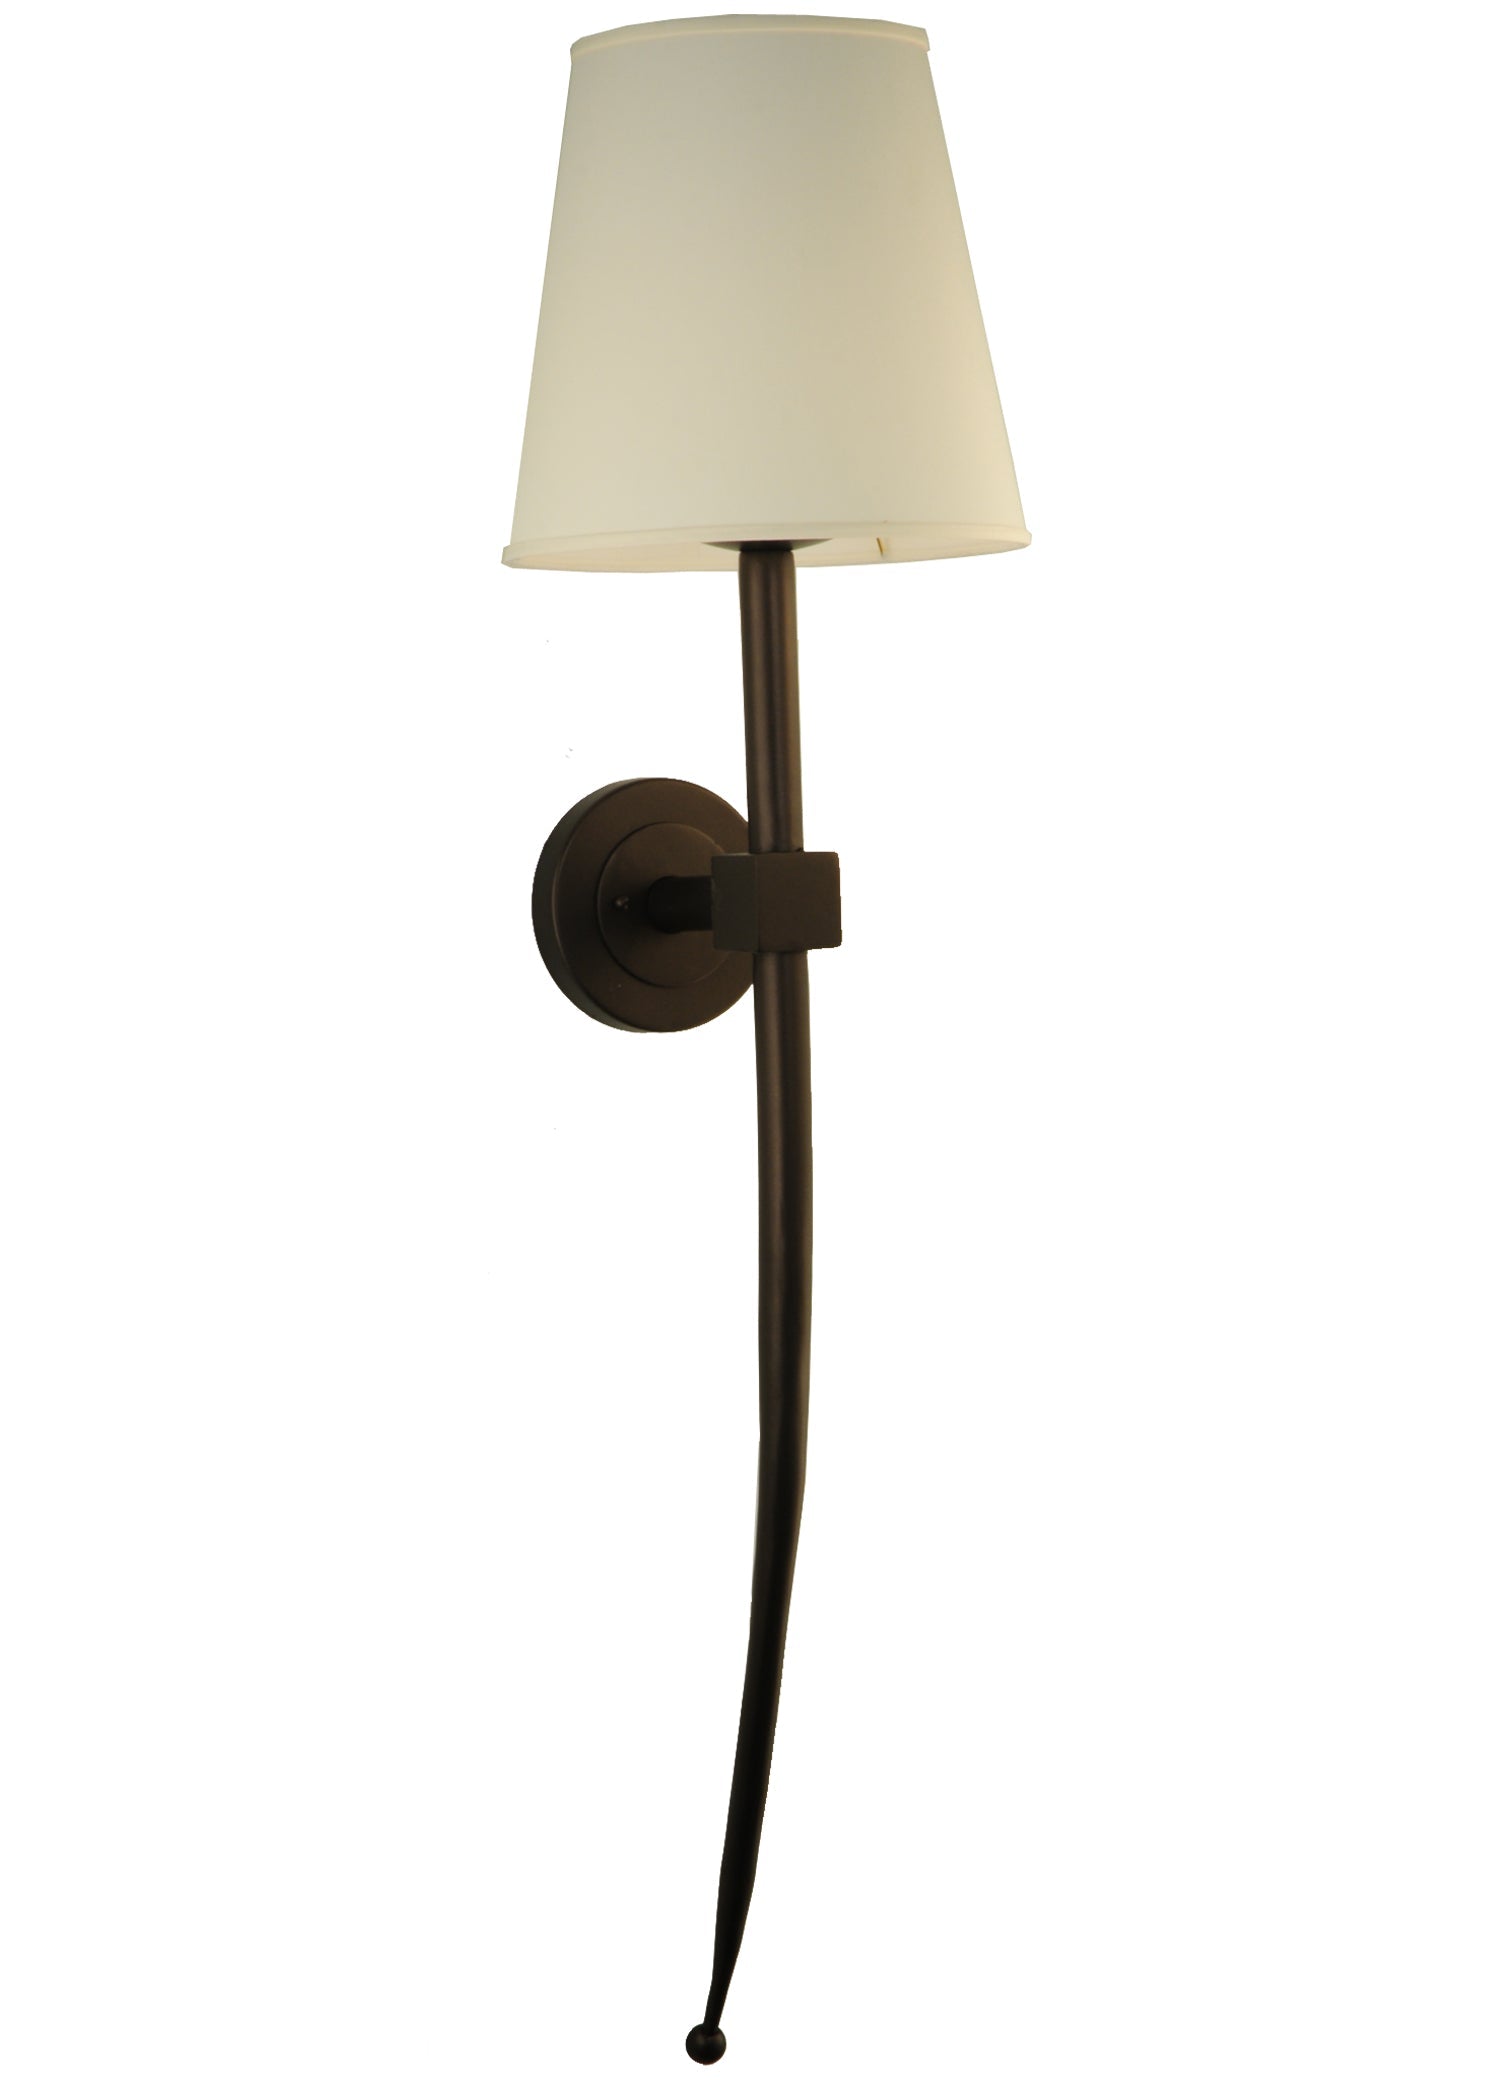 12" Bechar Wall Sconce by 2nd Ave Lighting